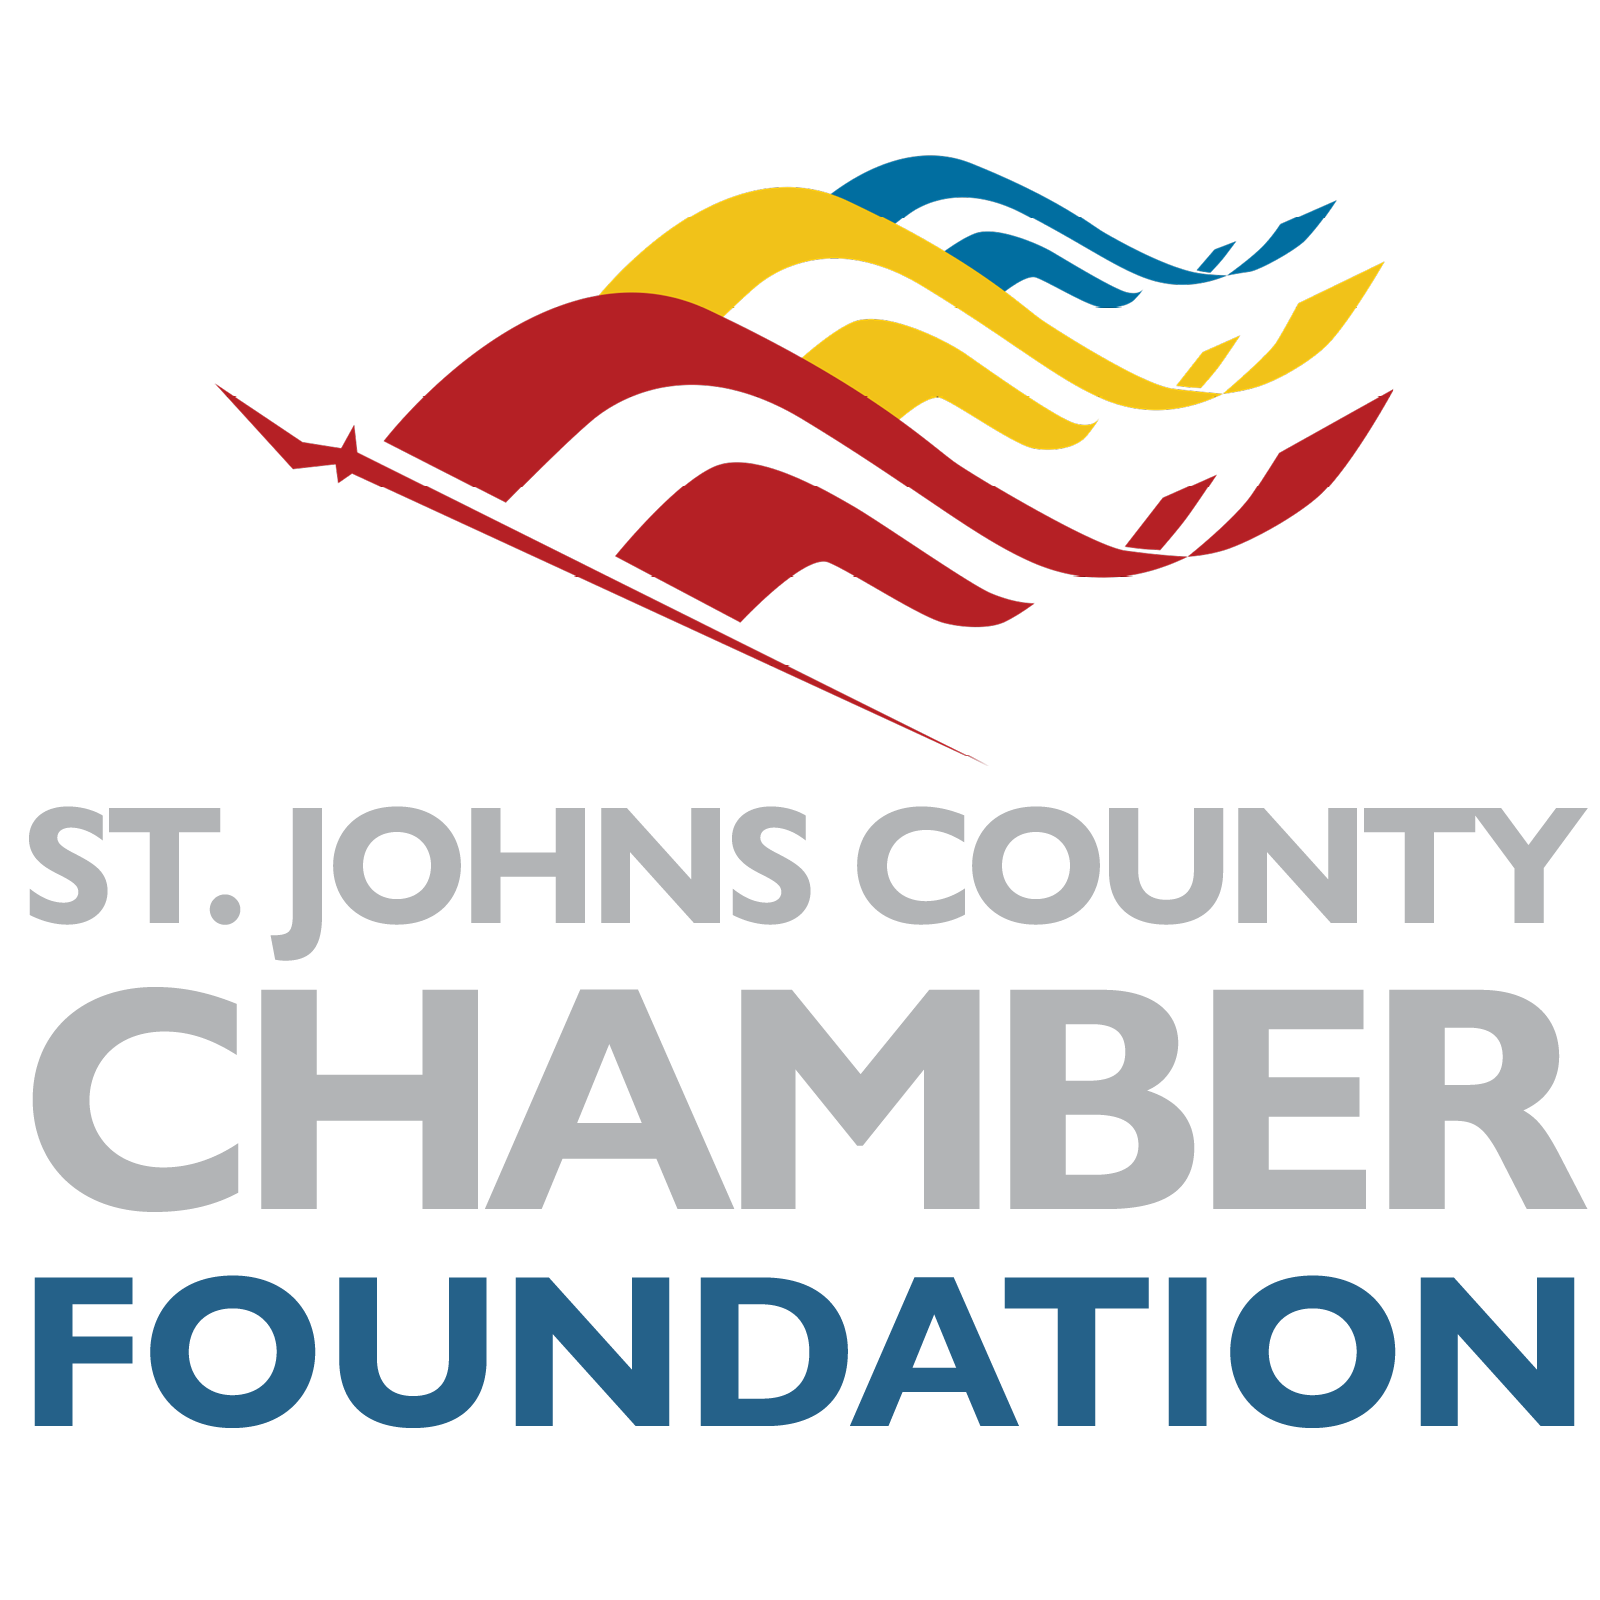 Image for St. Johns County Chamber of Commerce establishes foundation to better serve the community